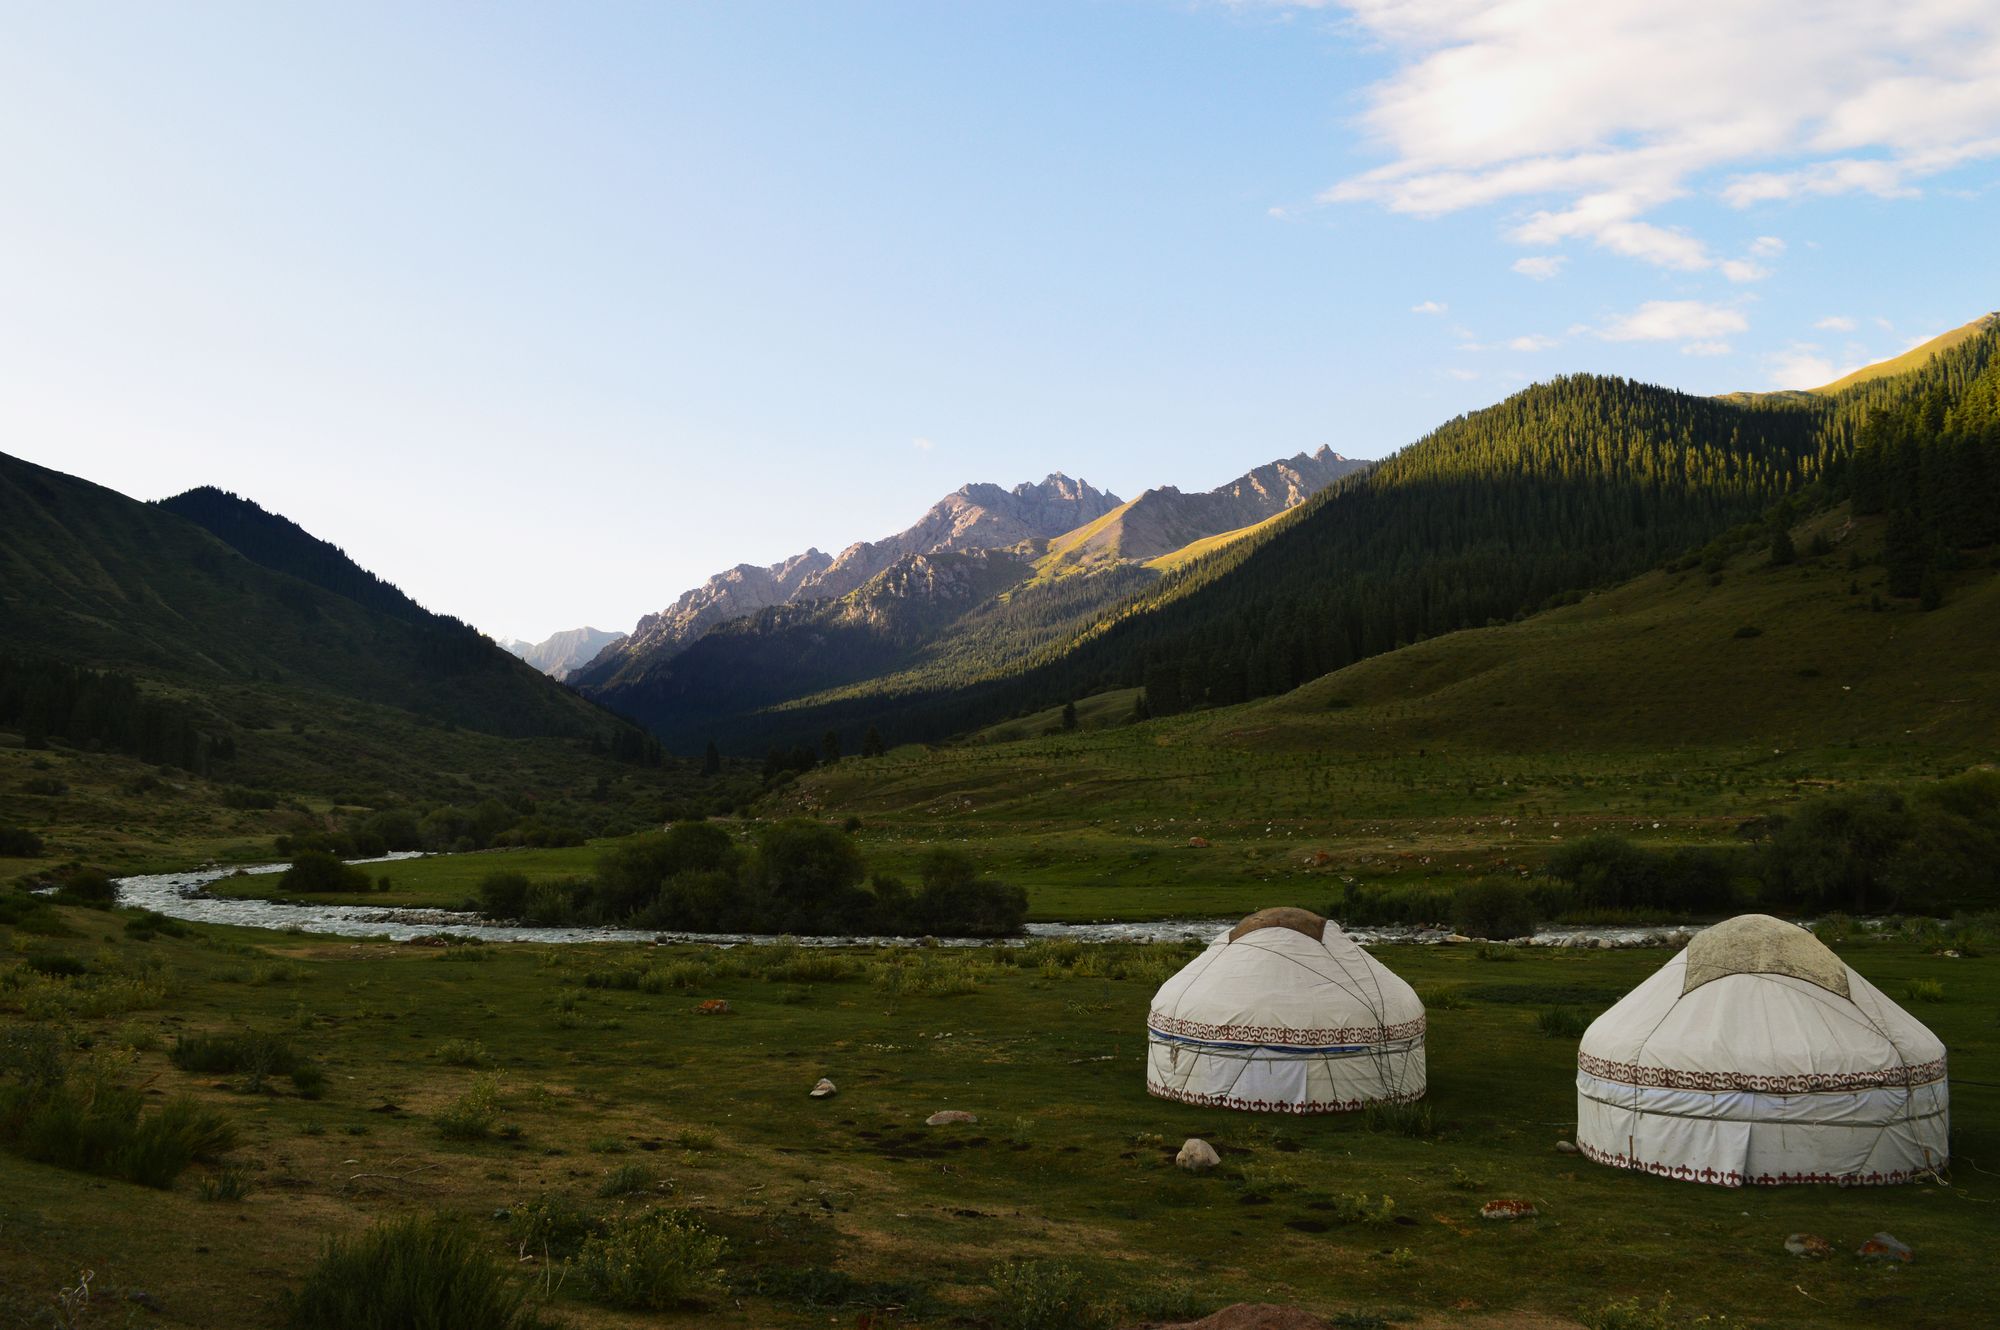 Yurts by the river in Kyrgyzstan.